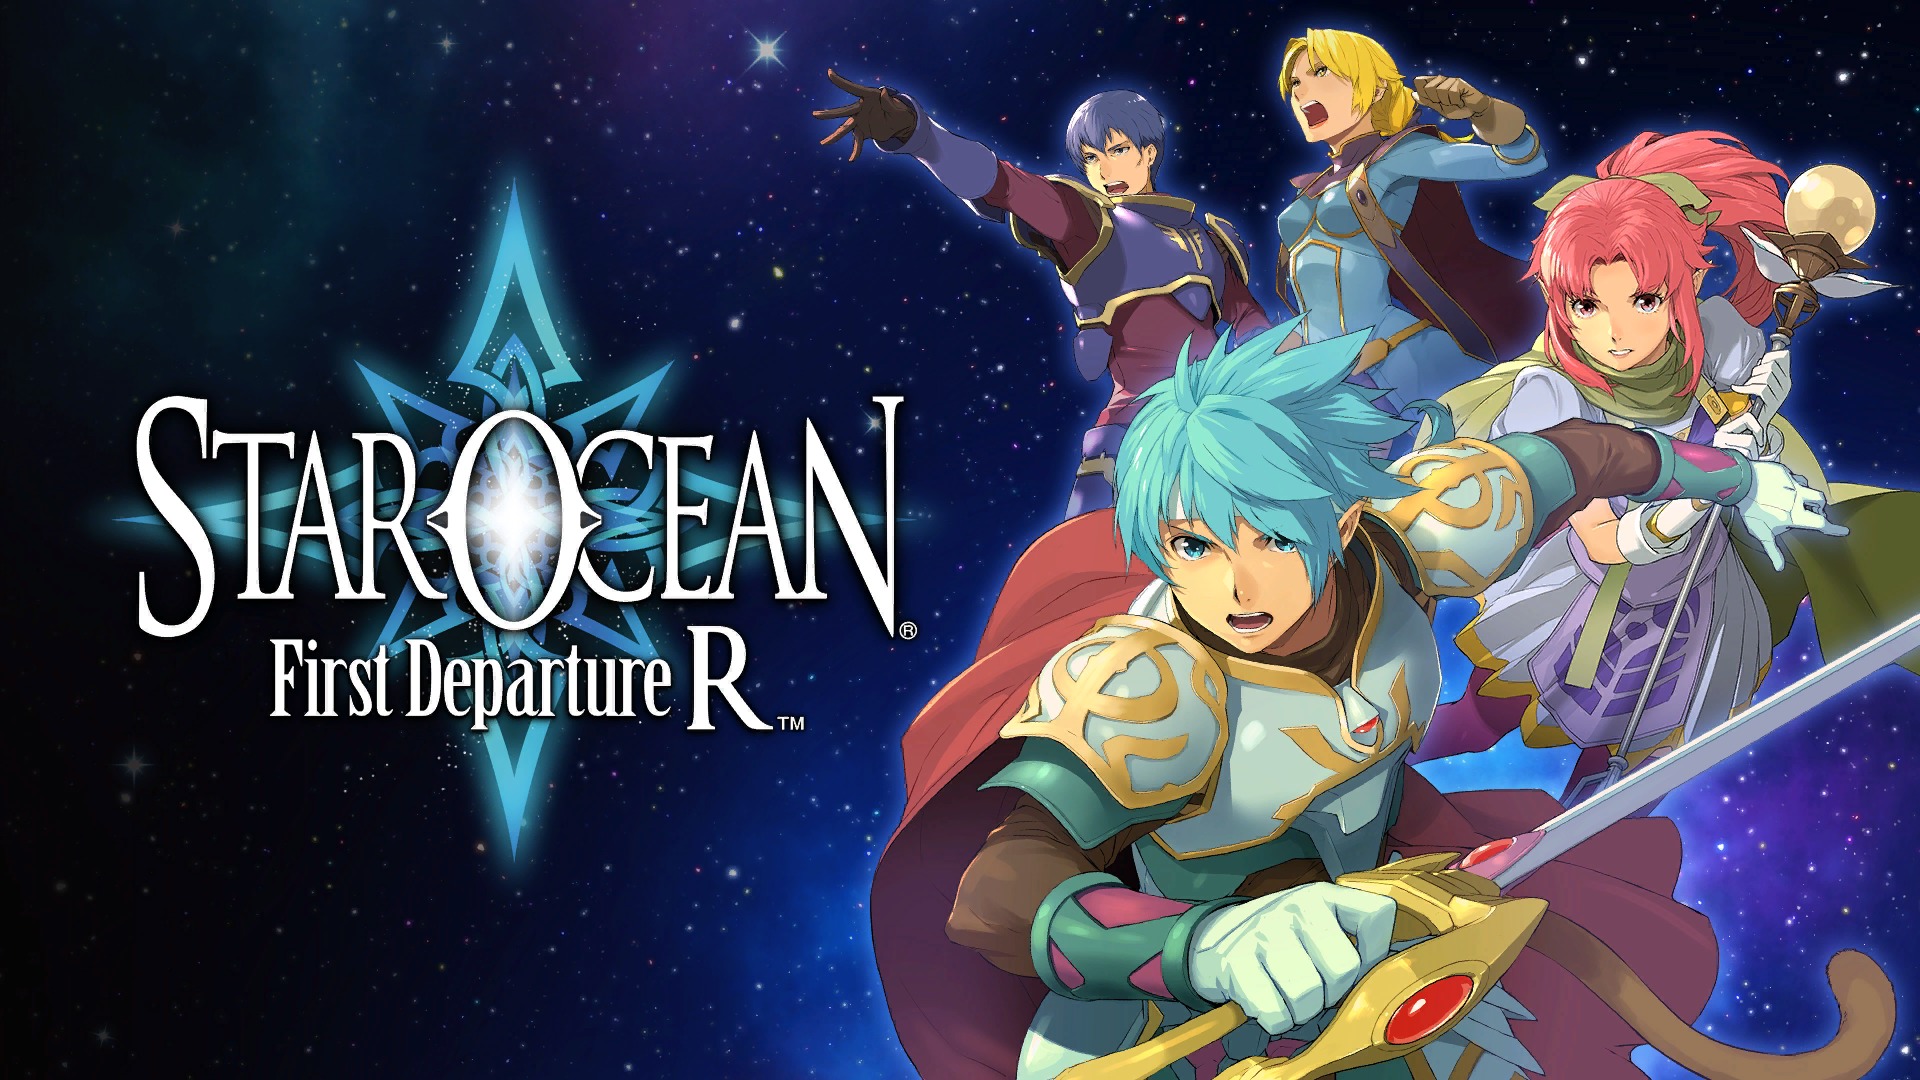 Review: Star Ocean: First Departure and First Departure R (PSP